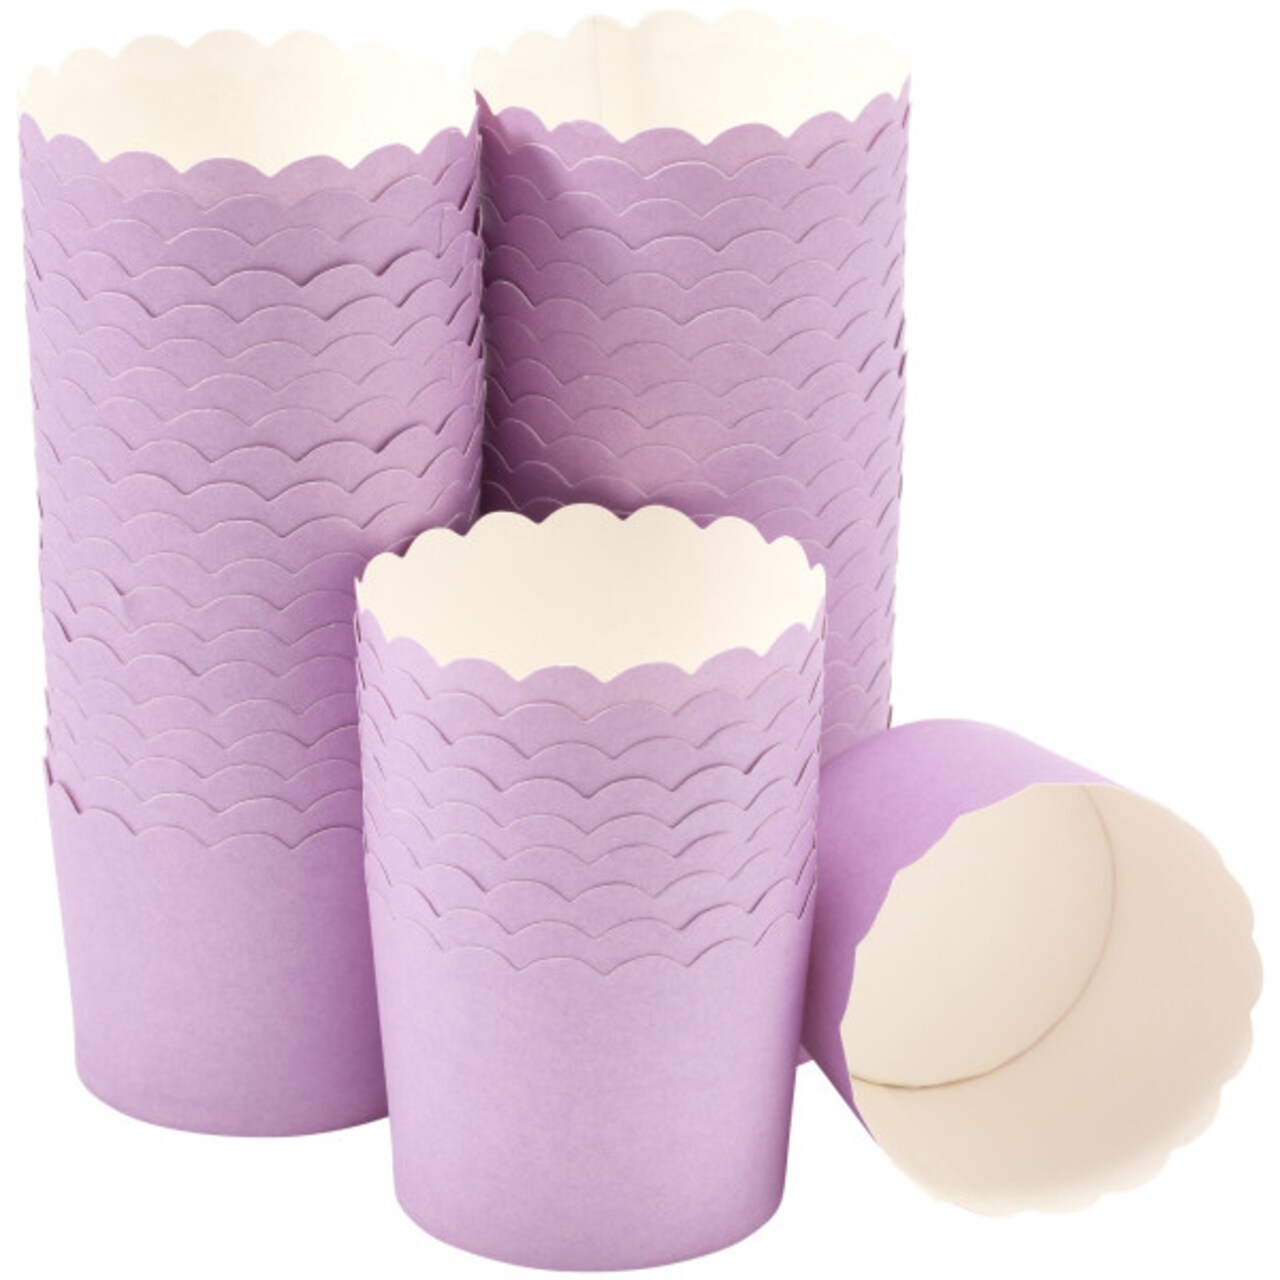 Lilac Scalloped Baking Cups 50ct